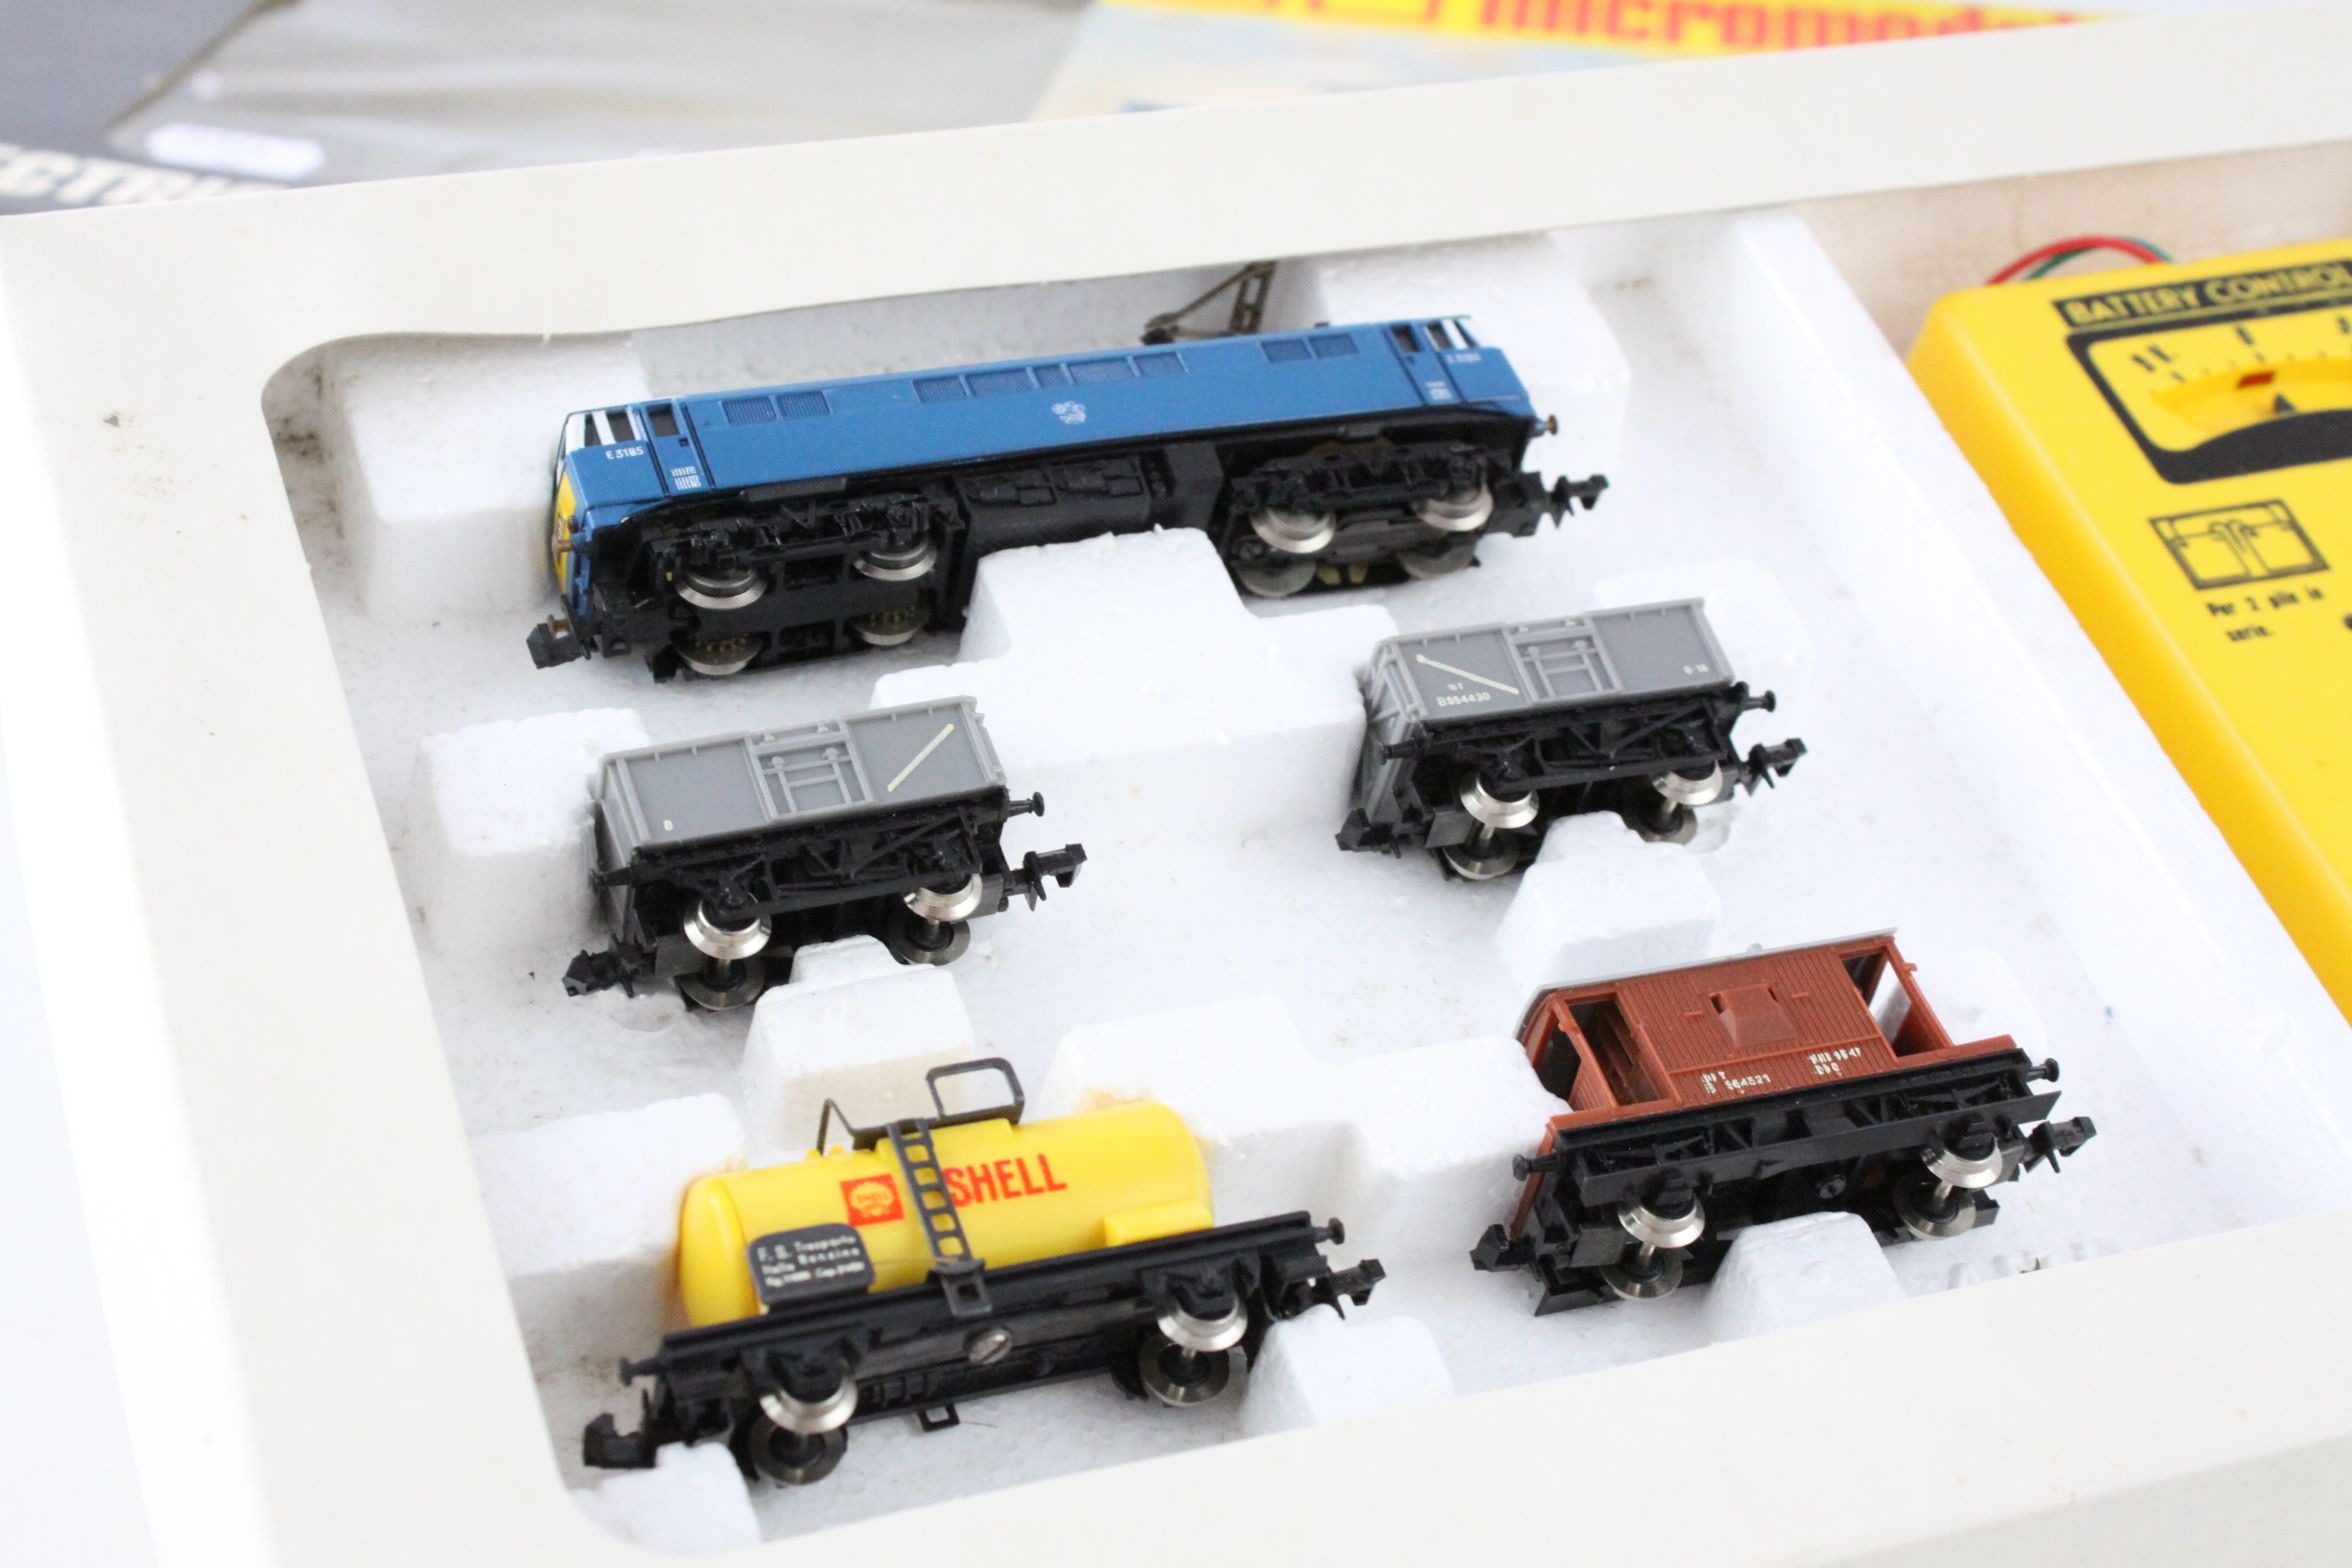 Boxed Wrenn Lima N gauge electric train set No 2 BR Goods, appearing complete with locomotive, - Image 3 of 5